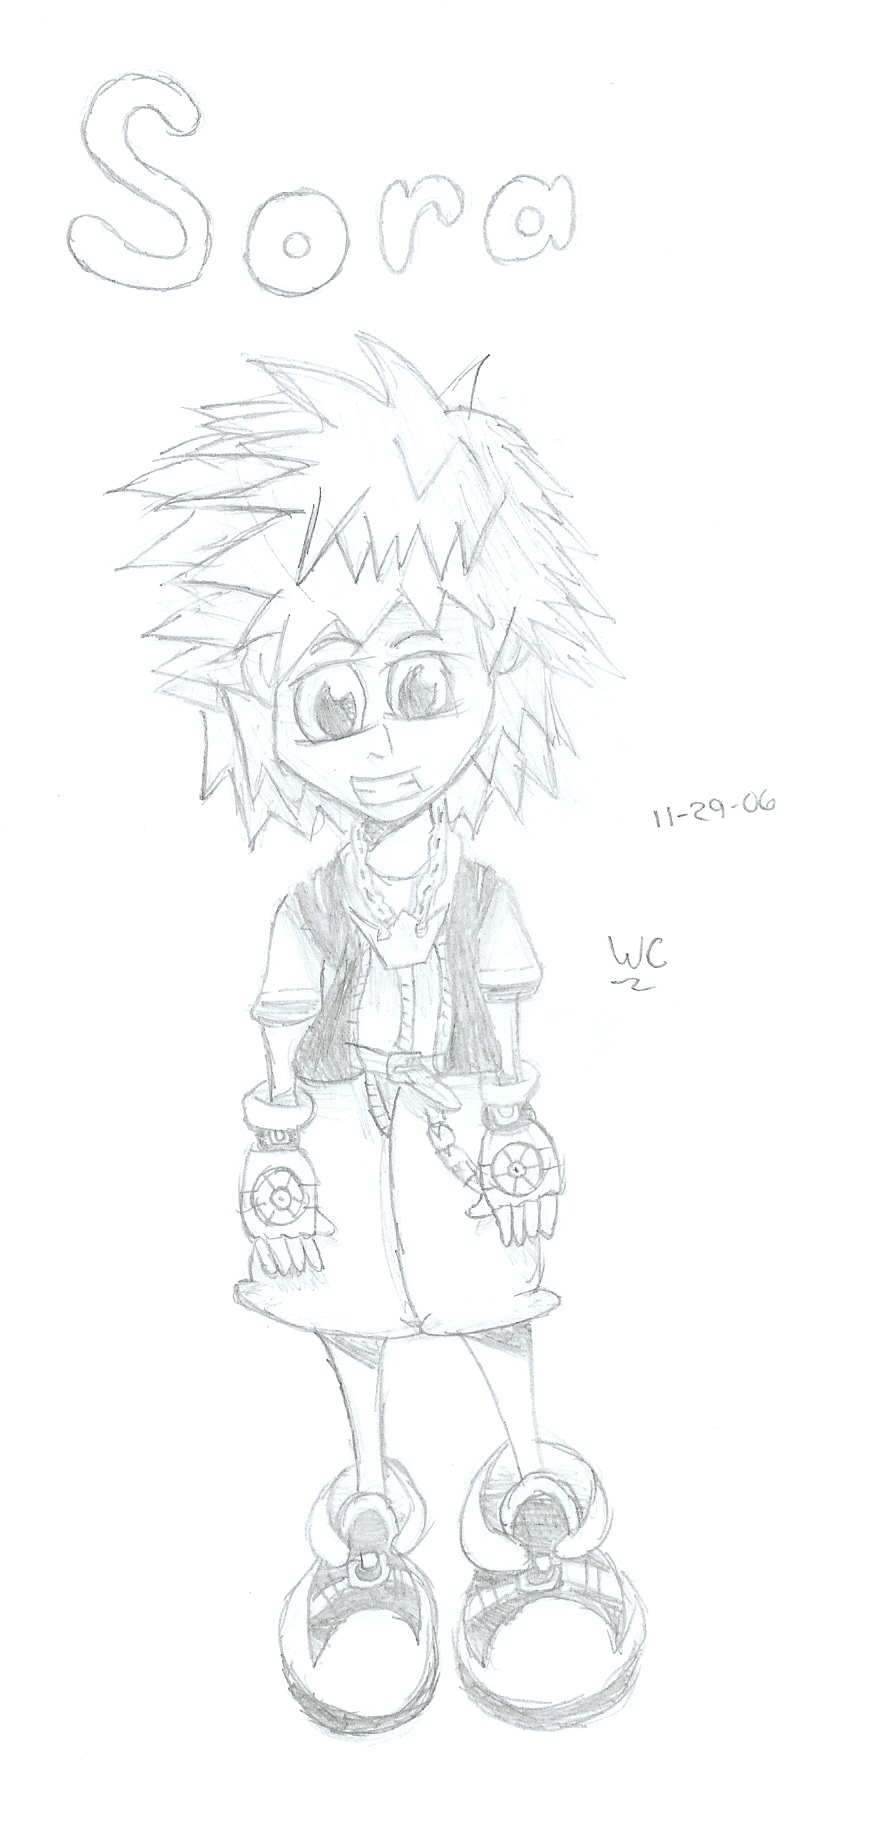 Sora! by pacmaster2000